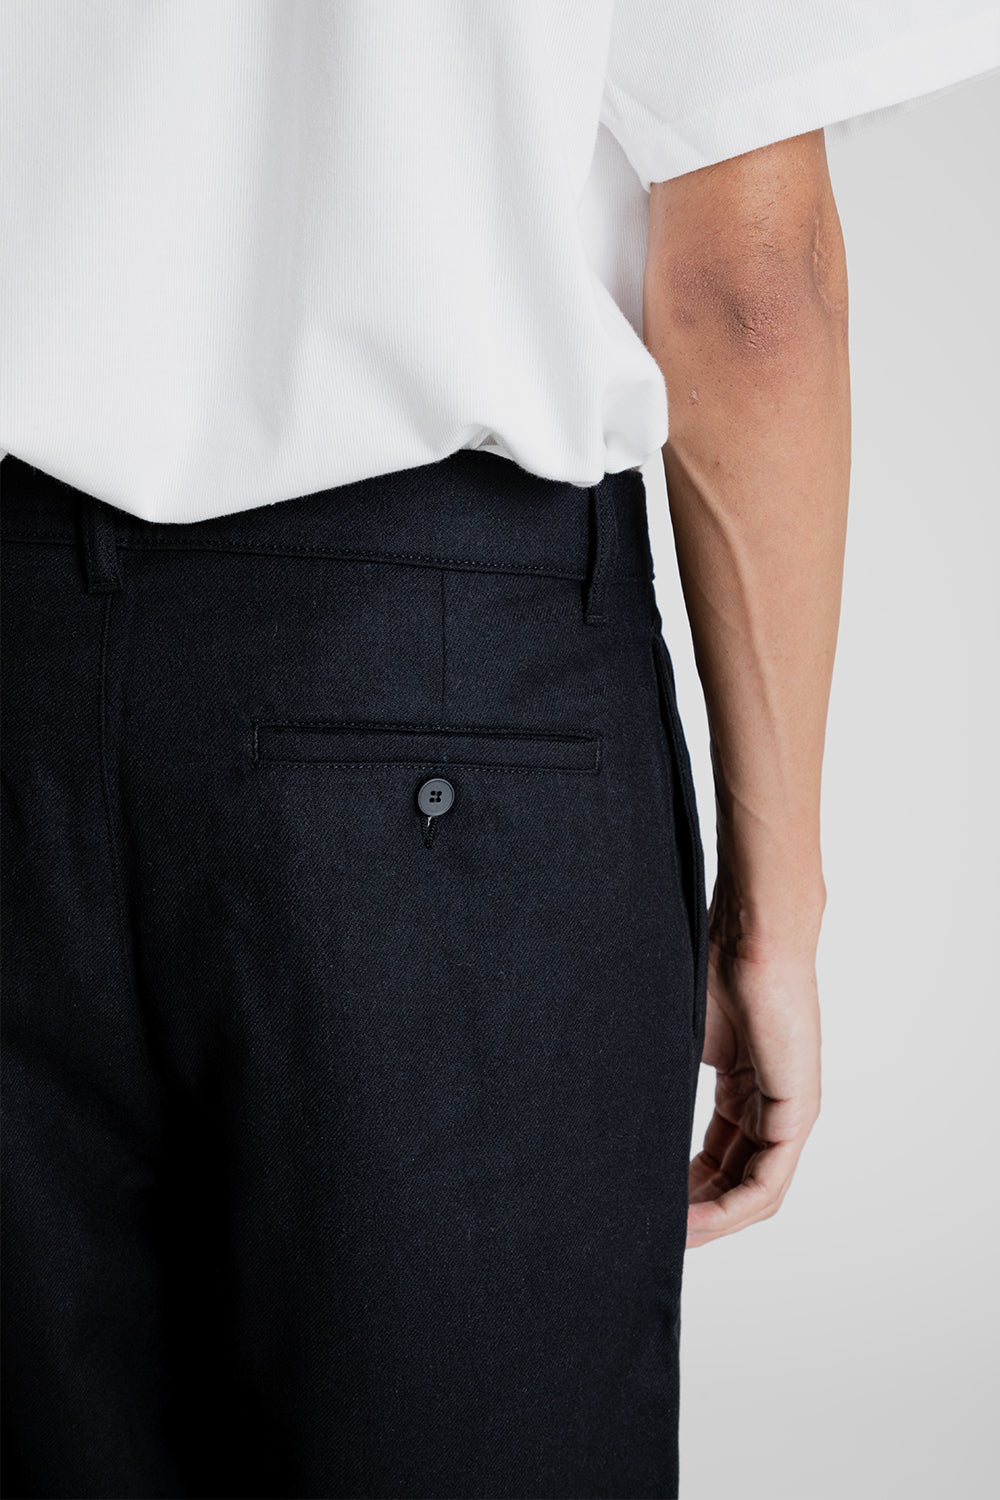 Parages Dock Twill Pants in Black